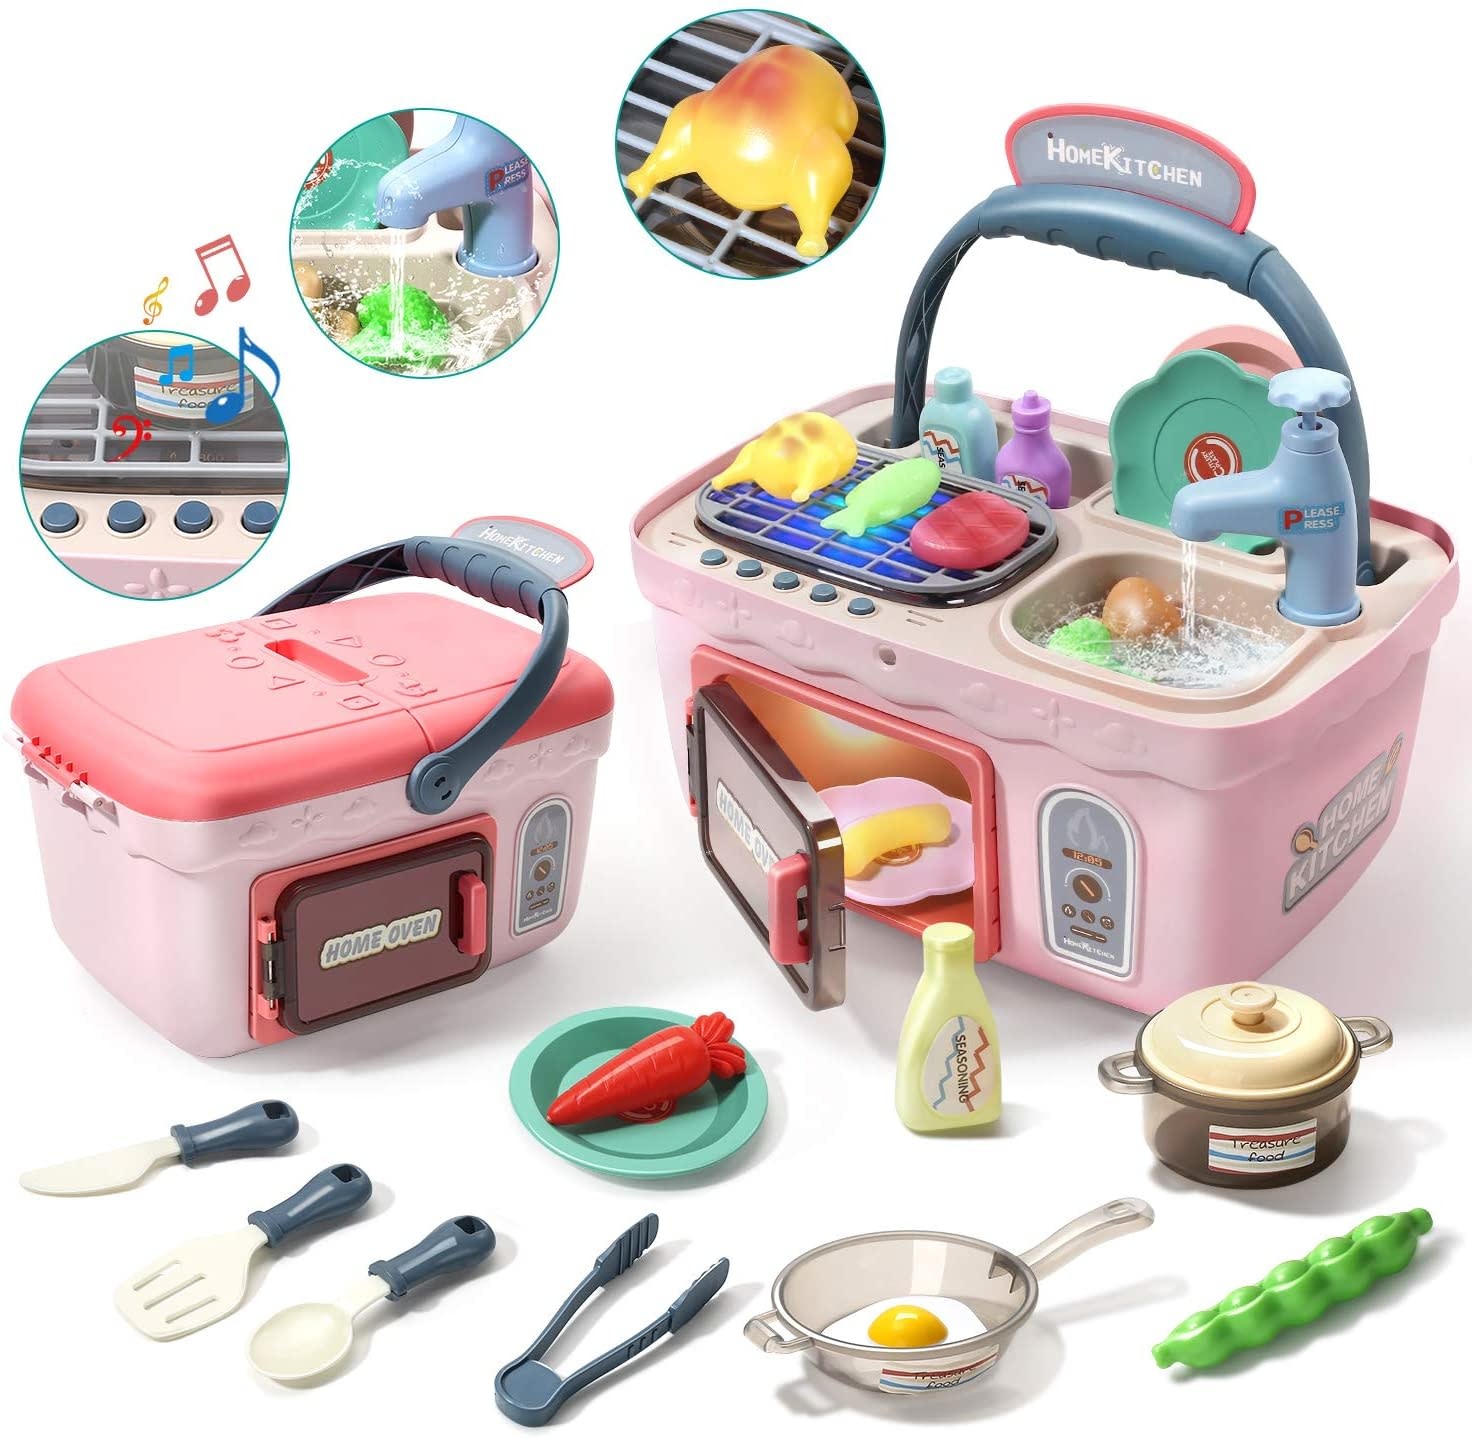 CUTE STONE KIDS PICNIC & KITCHEN PLAYSET PINK - baby enRoute